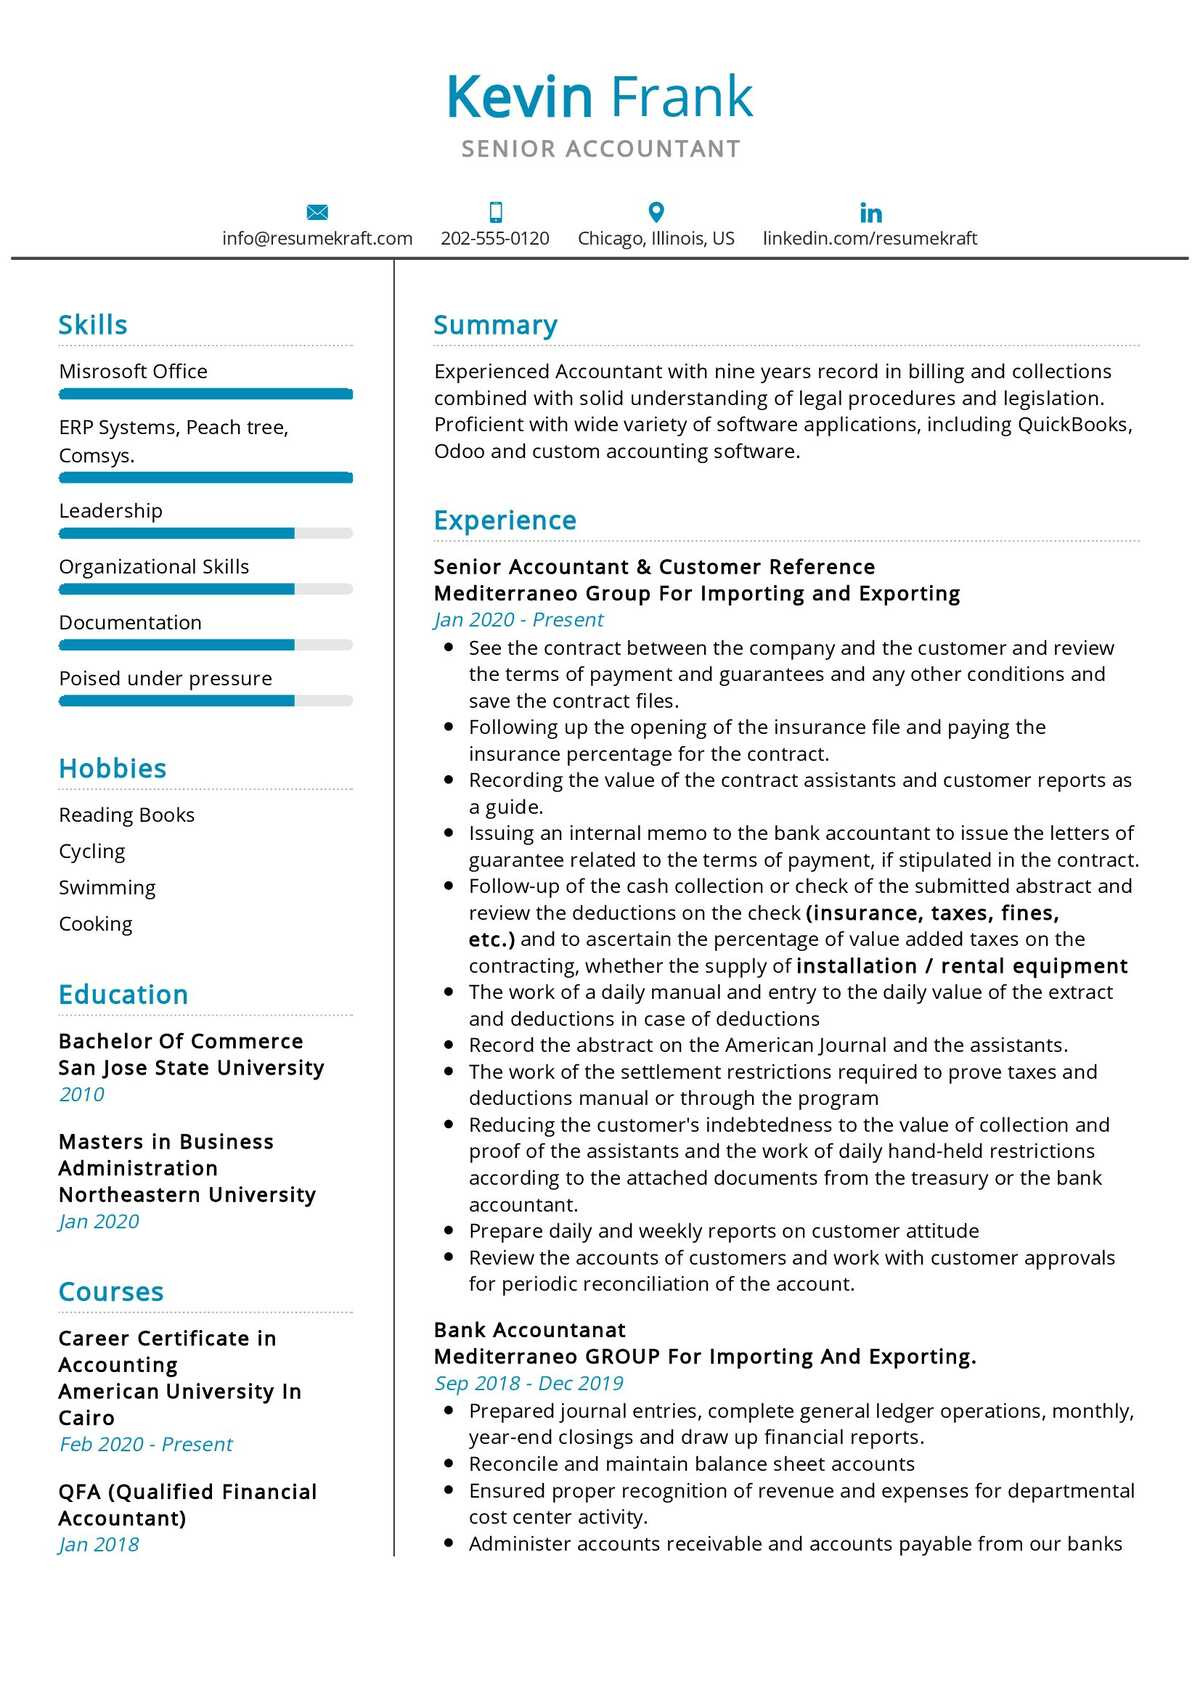 Sample Of Good Objective On Resume for Banking Accounting Senior Accountant Resume Example 2021 Writing Guide – Resumekraft